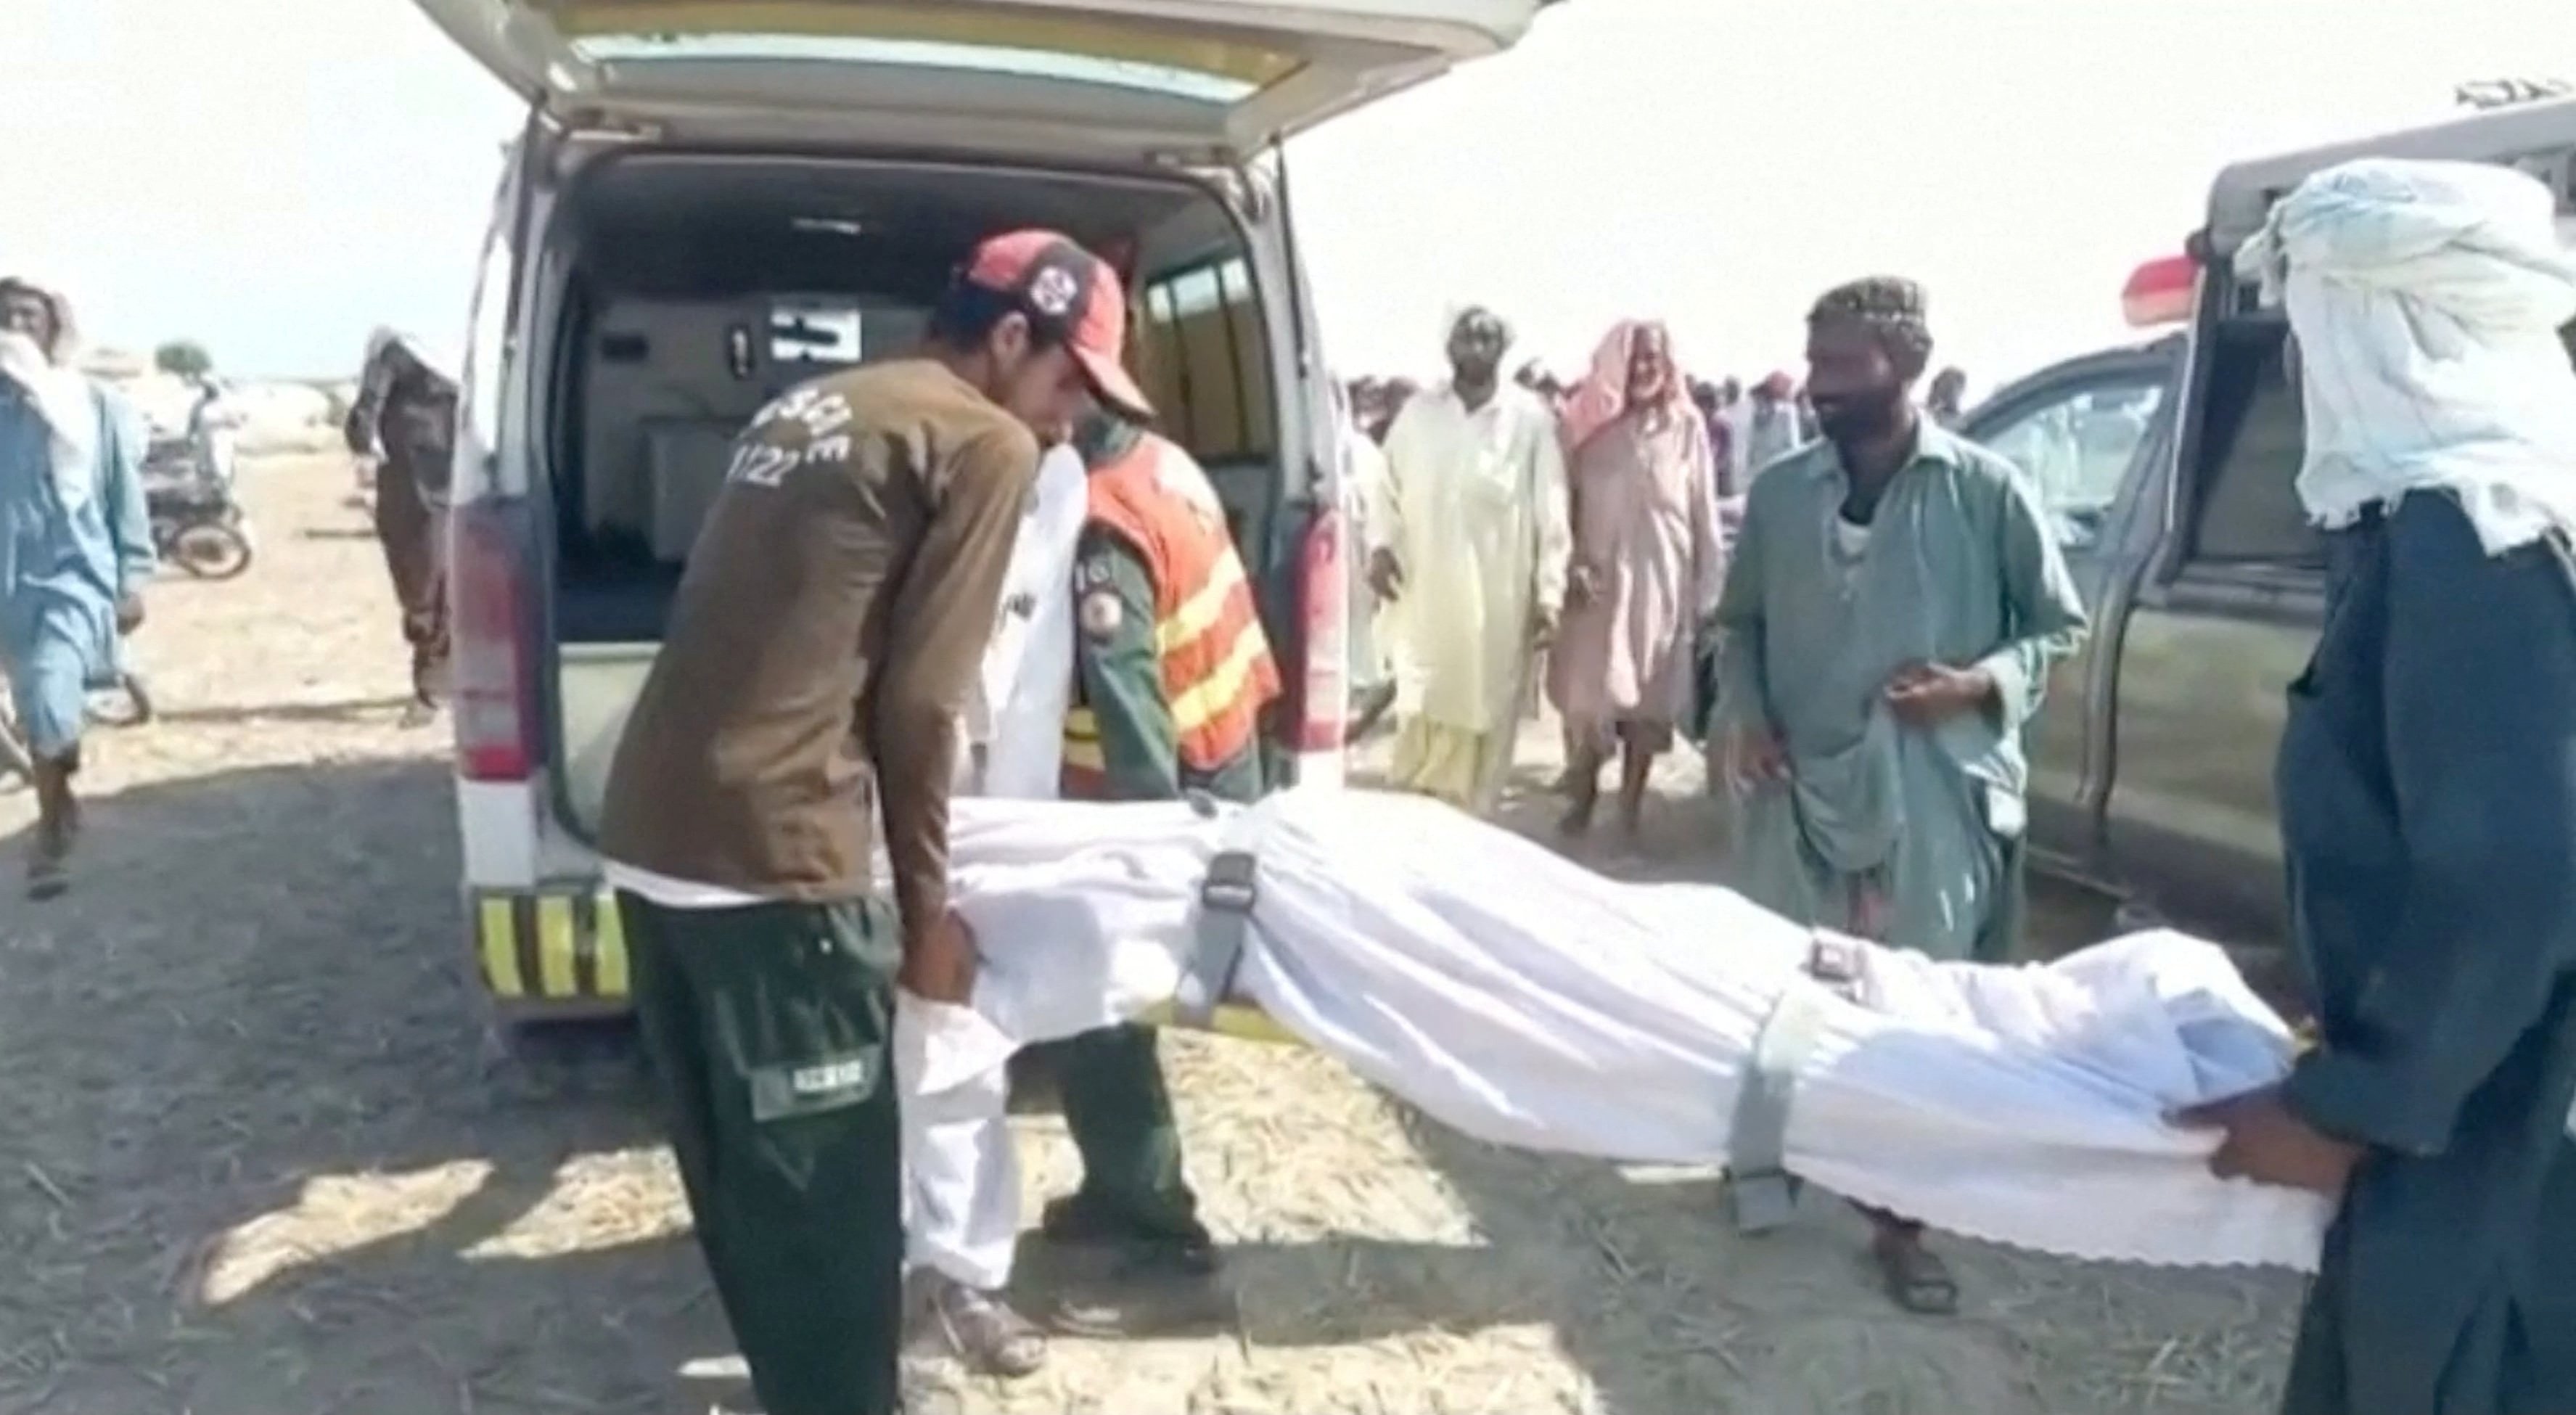 Locals carry a dead body covered in a white sheet to an ambulance, after a boat carrying around 100 people capsized in a central Pakistani river, in Sadiqabad, Pakistan, July 18, 2022, in this still image taken from a handout video. Punjab Government/Handout via REUTERS